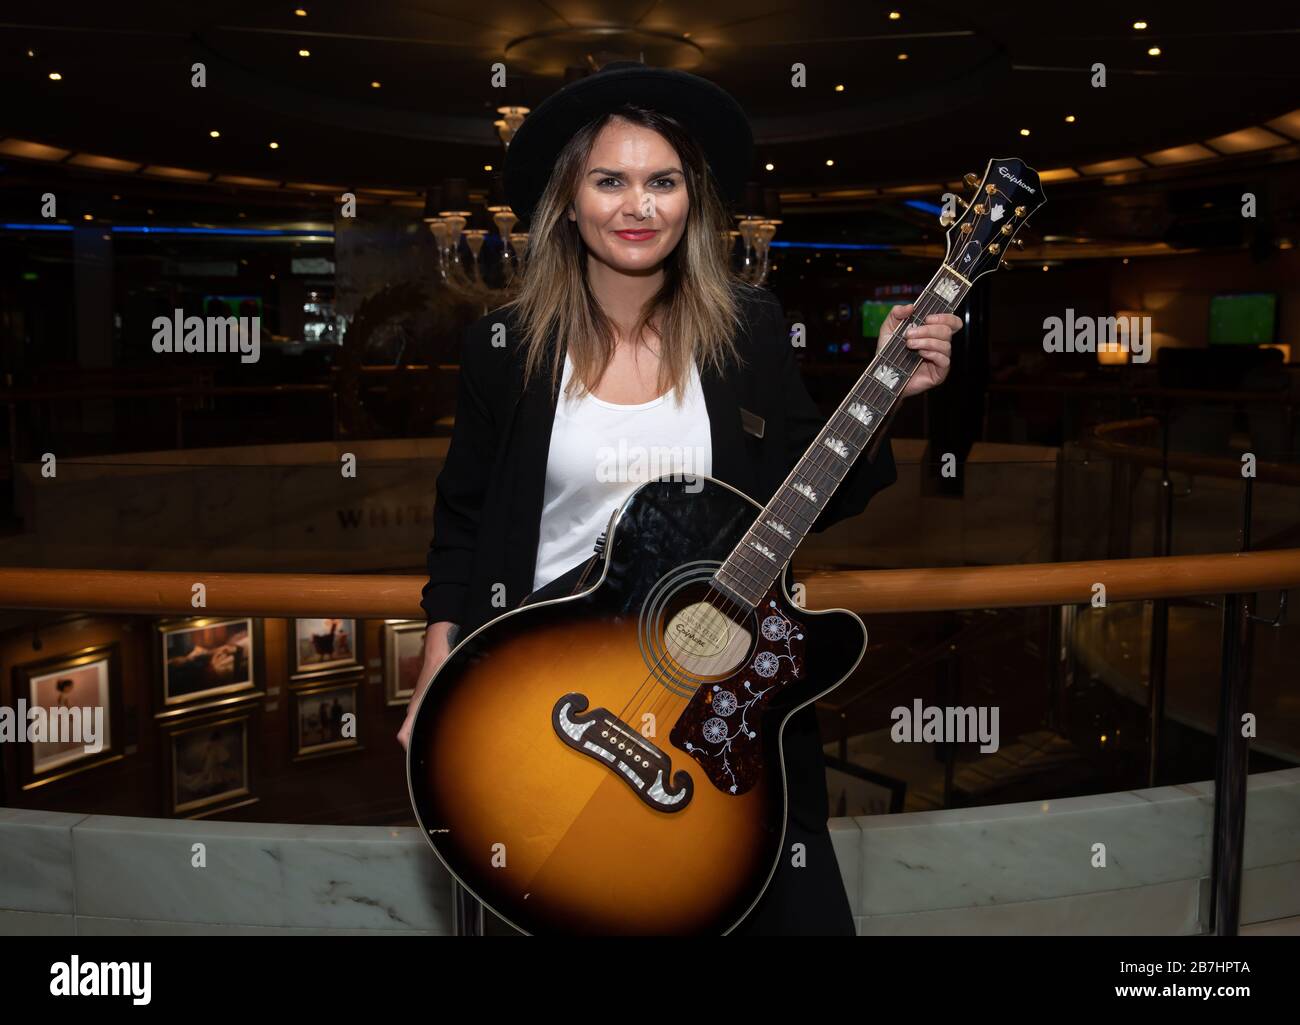 Angela Grace Brown Singer And Guitarist Posing In The Atrium Onboard Oceana Stock Photo Alamy